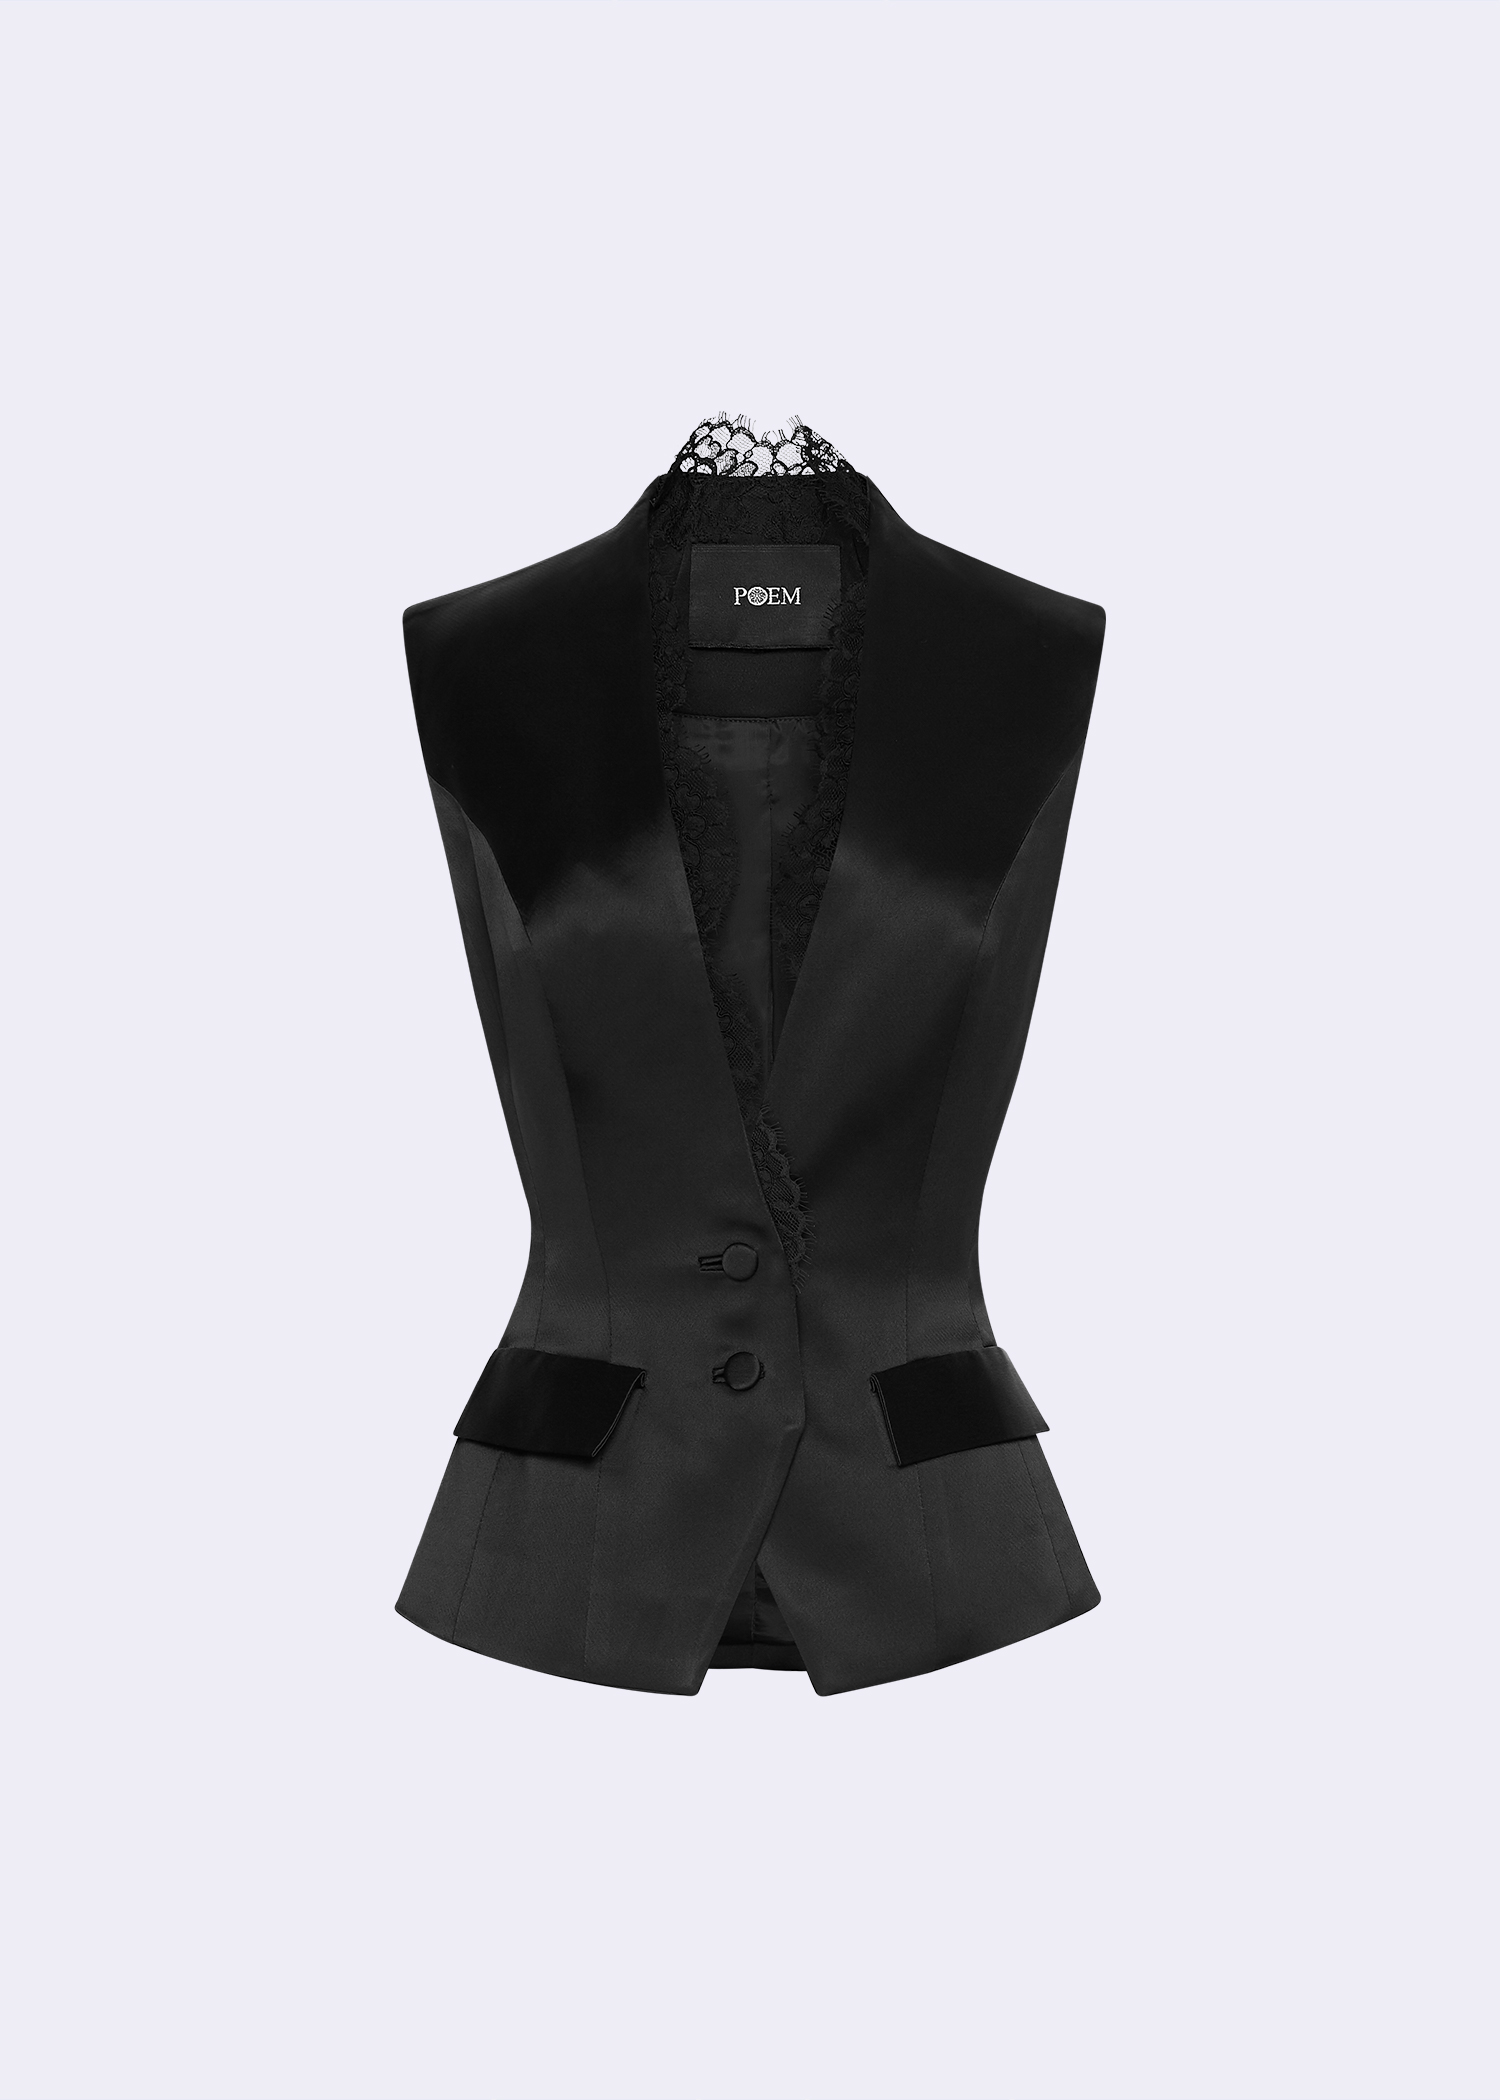 5010 Off-White Satin Crepe Waistcoat With Lace - POEM